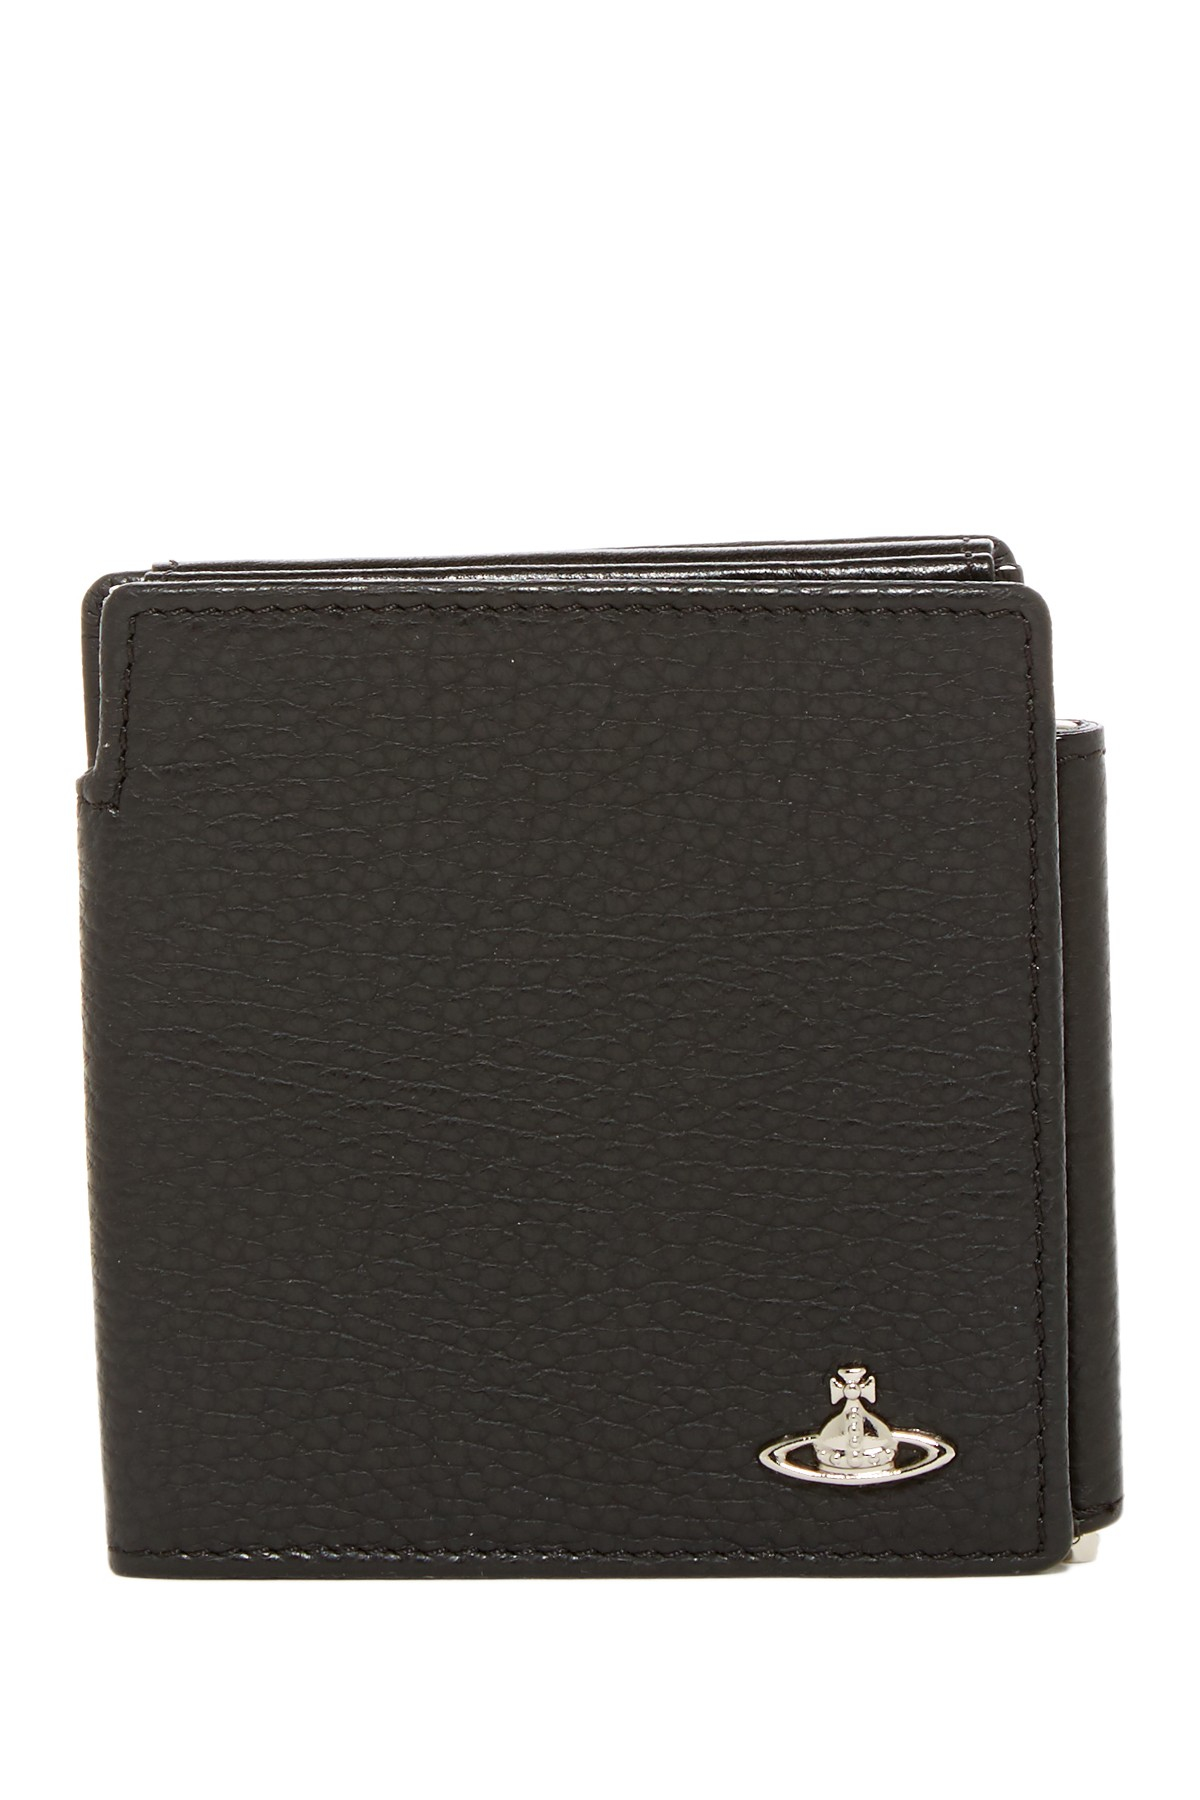 Black Leather Trifold Wallets For Men | IQS Executive